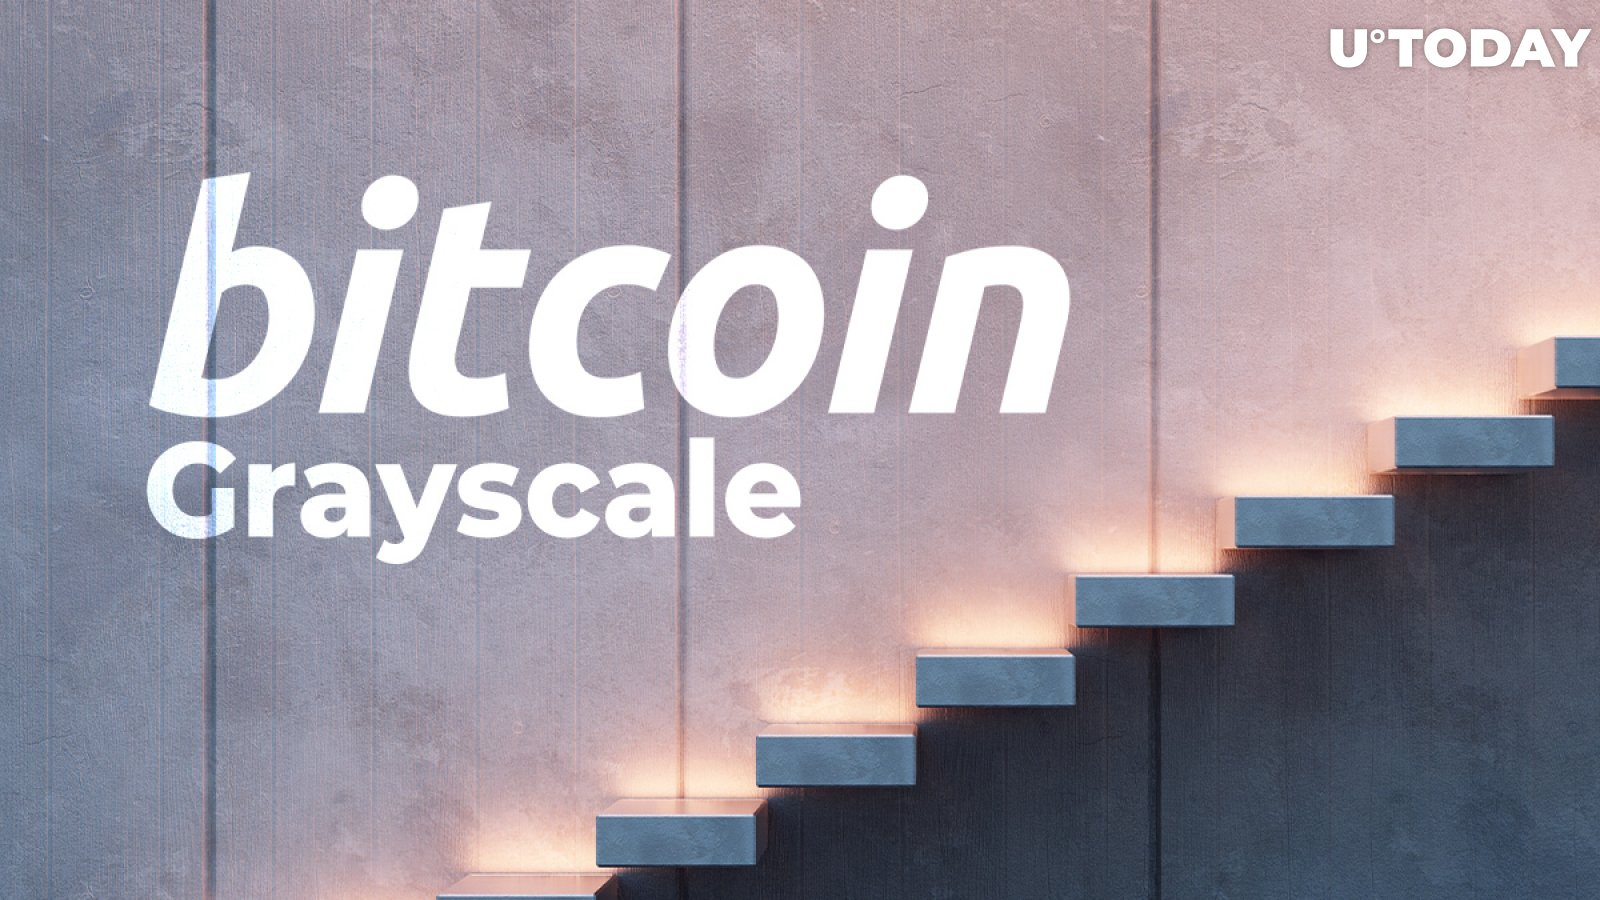 Major Corporations Want Bitcoin Exposure Via Grayscale, Following in Footsteps of Tesla